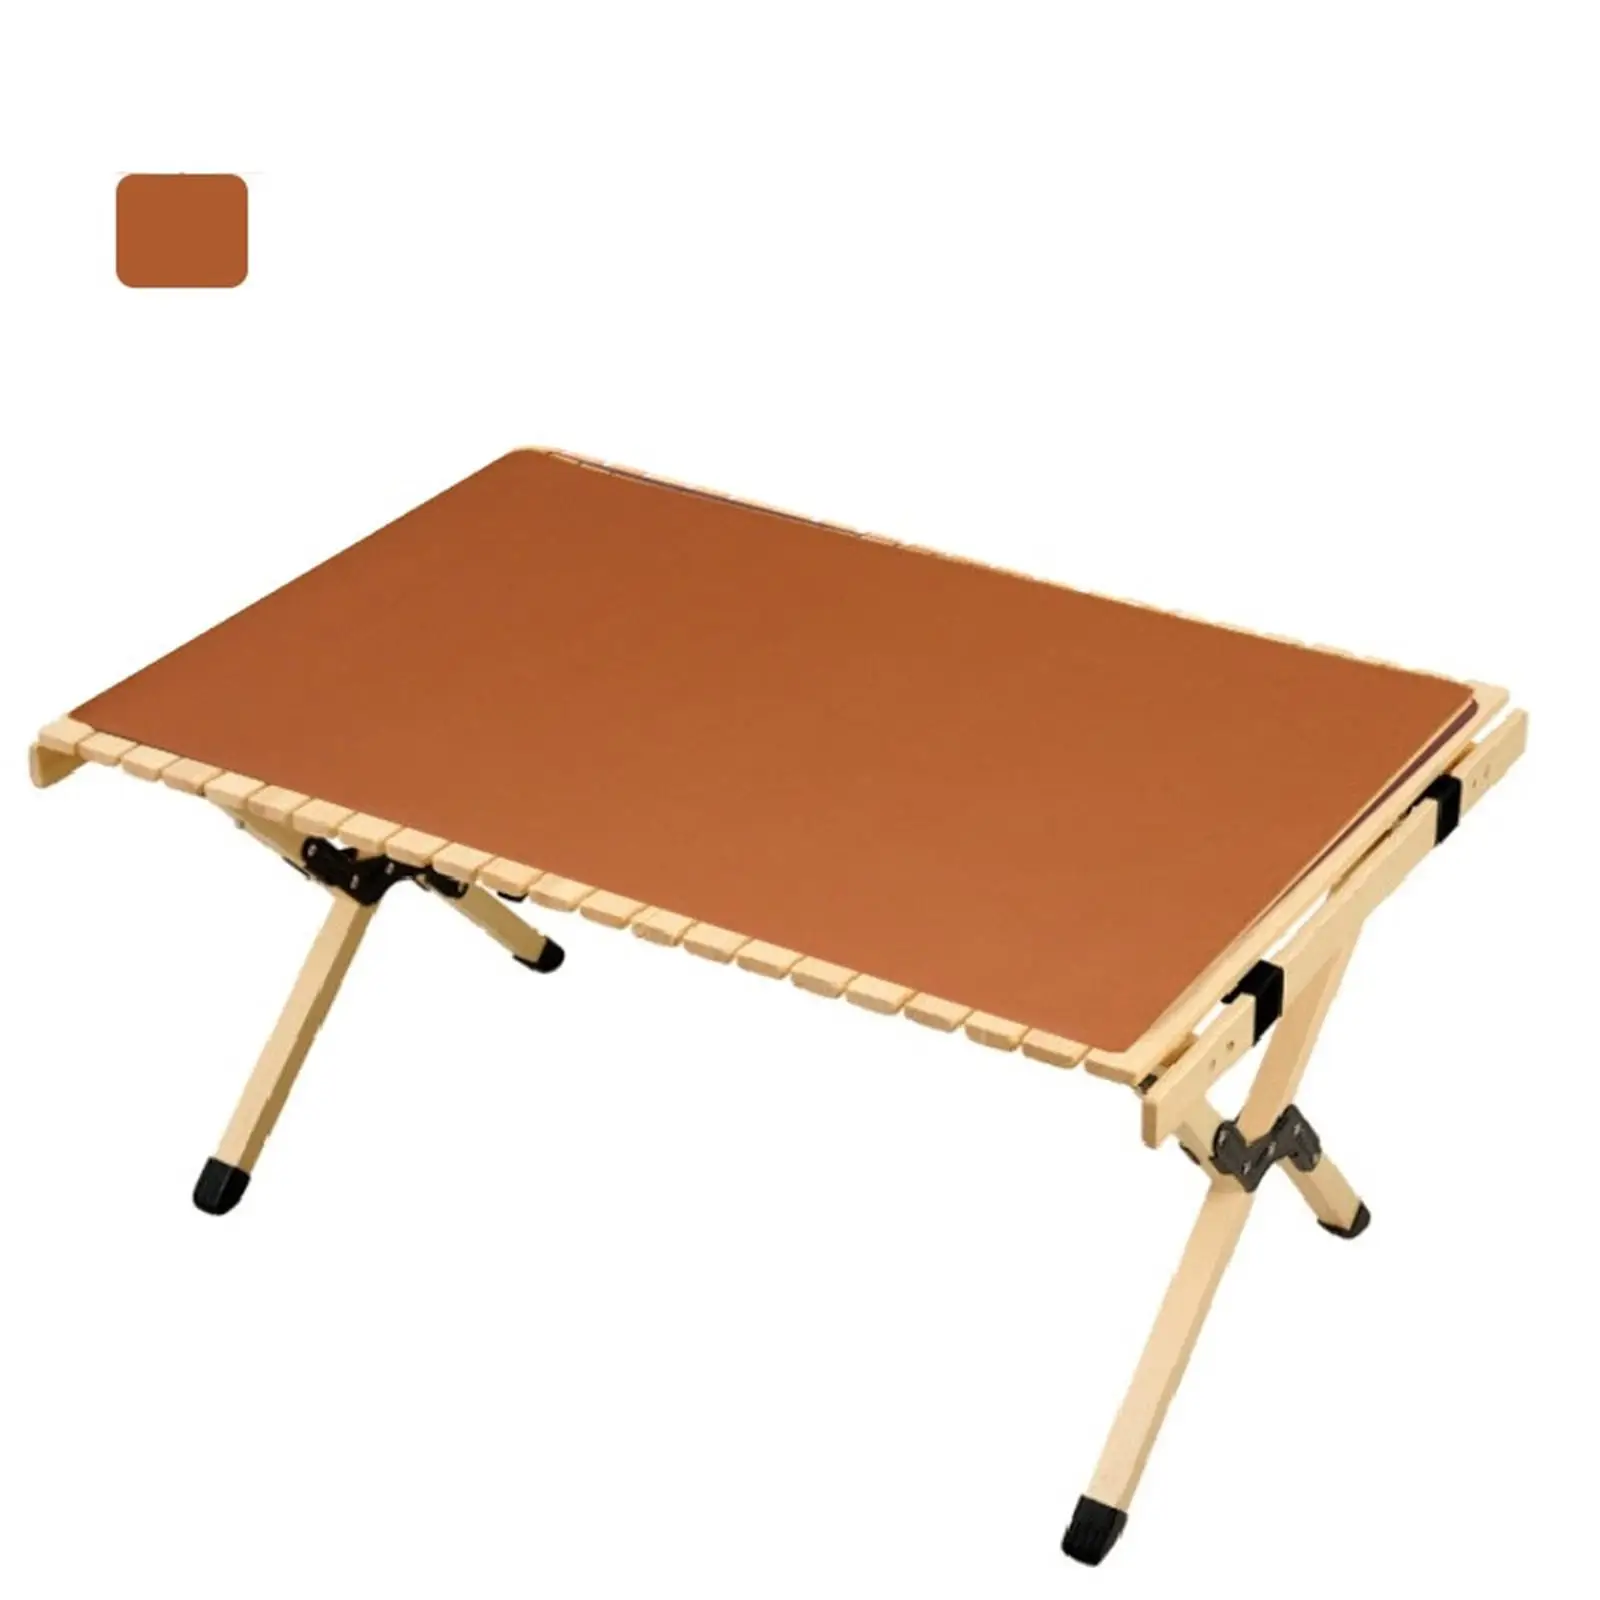 Folding Placemat Household Heat Insulation Oil Proof Home Decoration PU desk for Table BBQ Office Mountaineering Backpacking